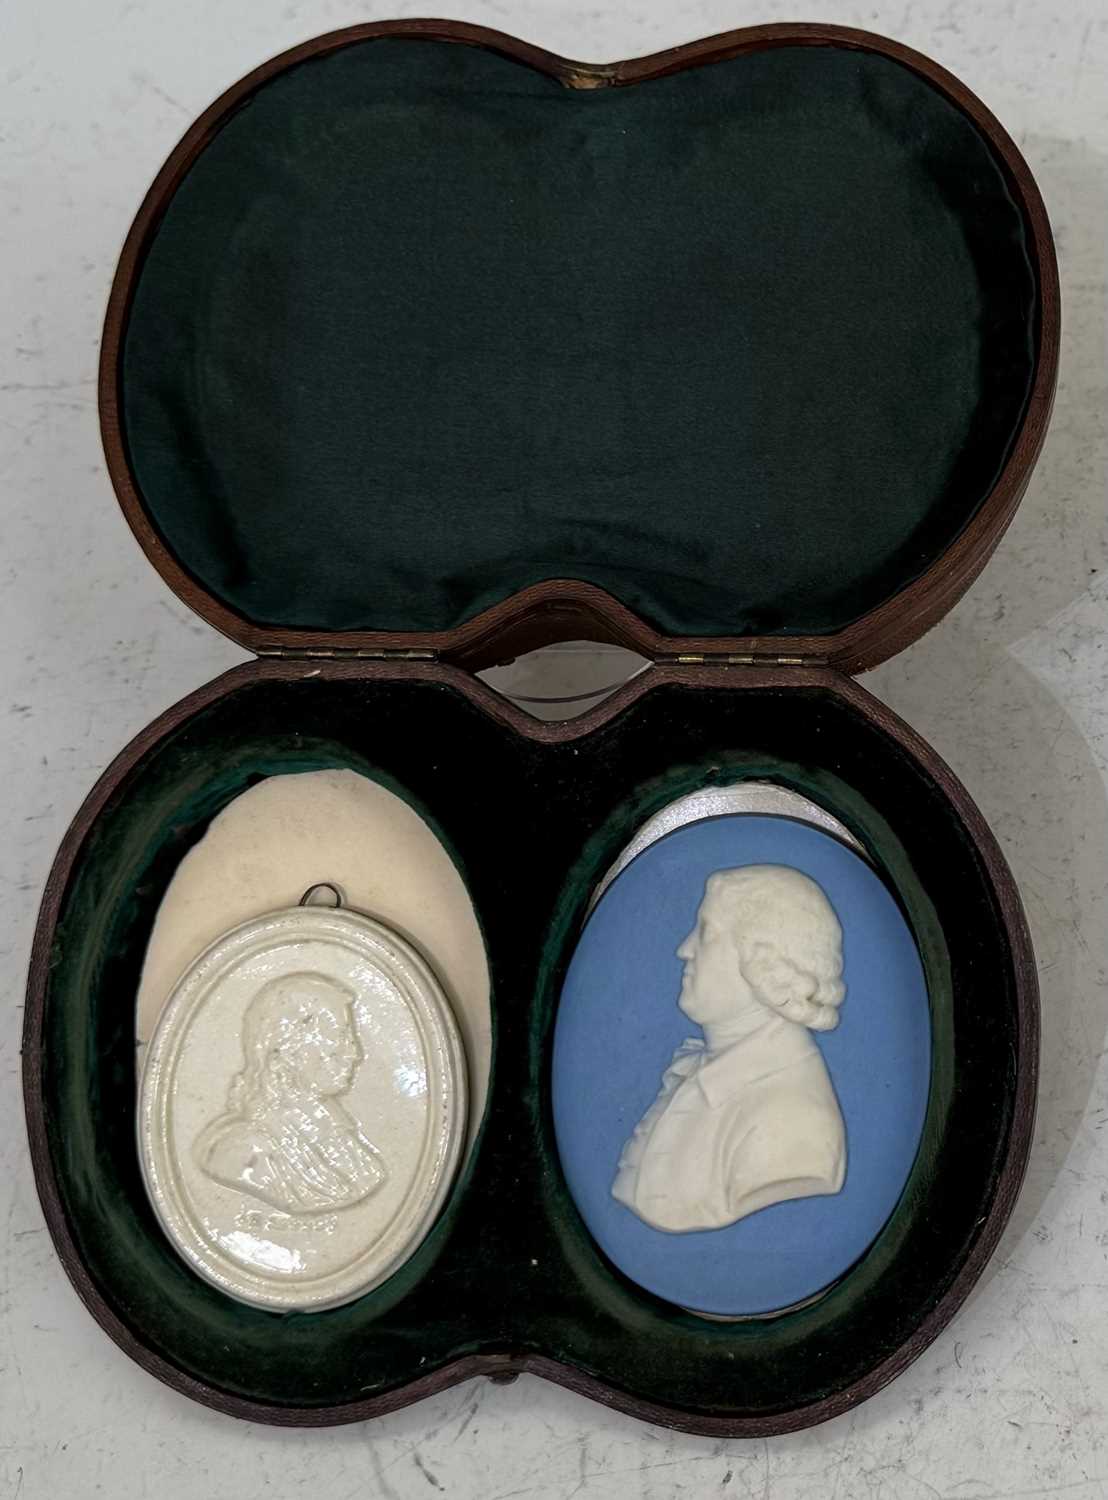 An antique Wedgwood blue ground Jasper Ware portrait medallion 8.3cm by 6.5cm; together with a Leeds